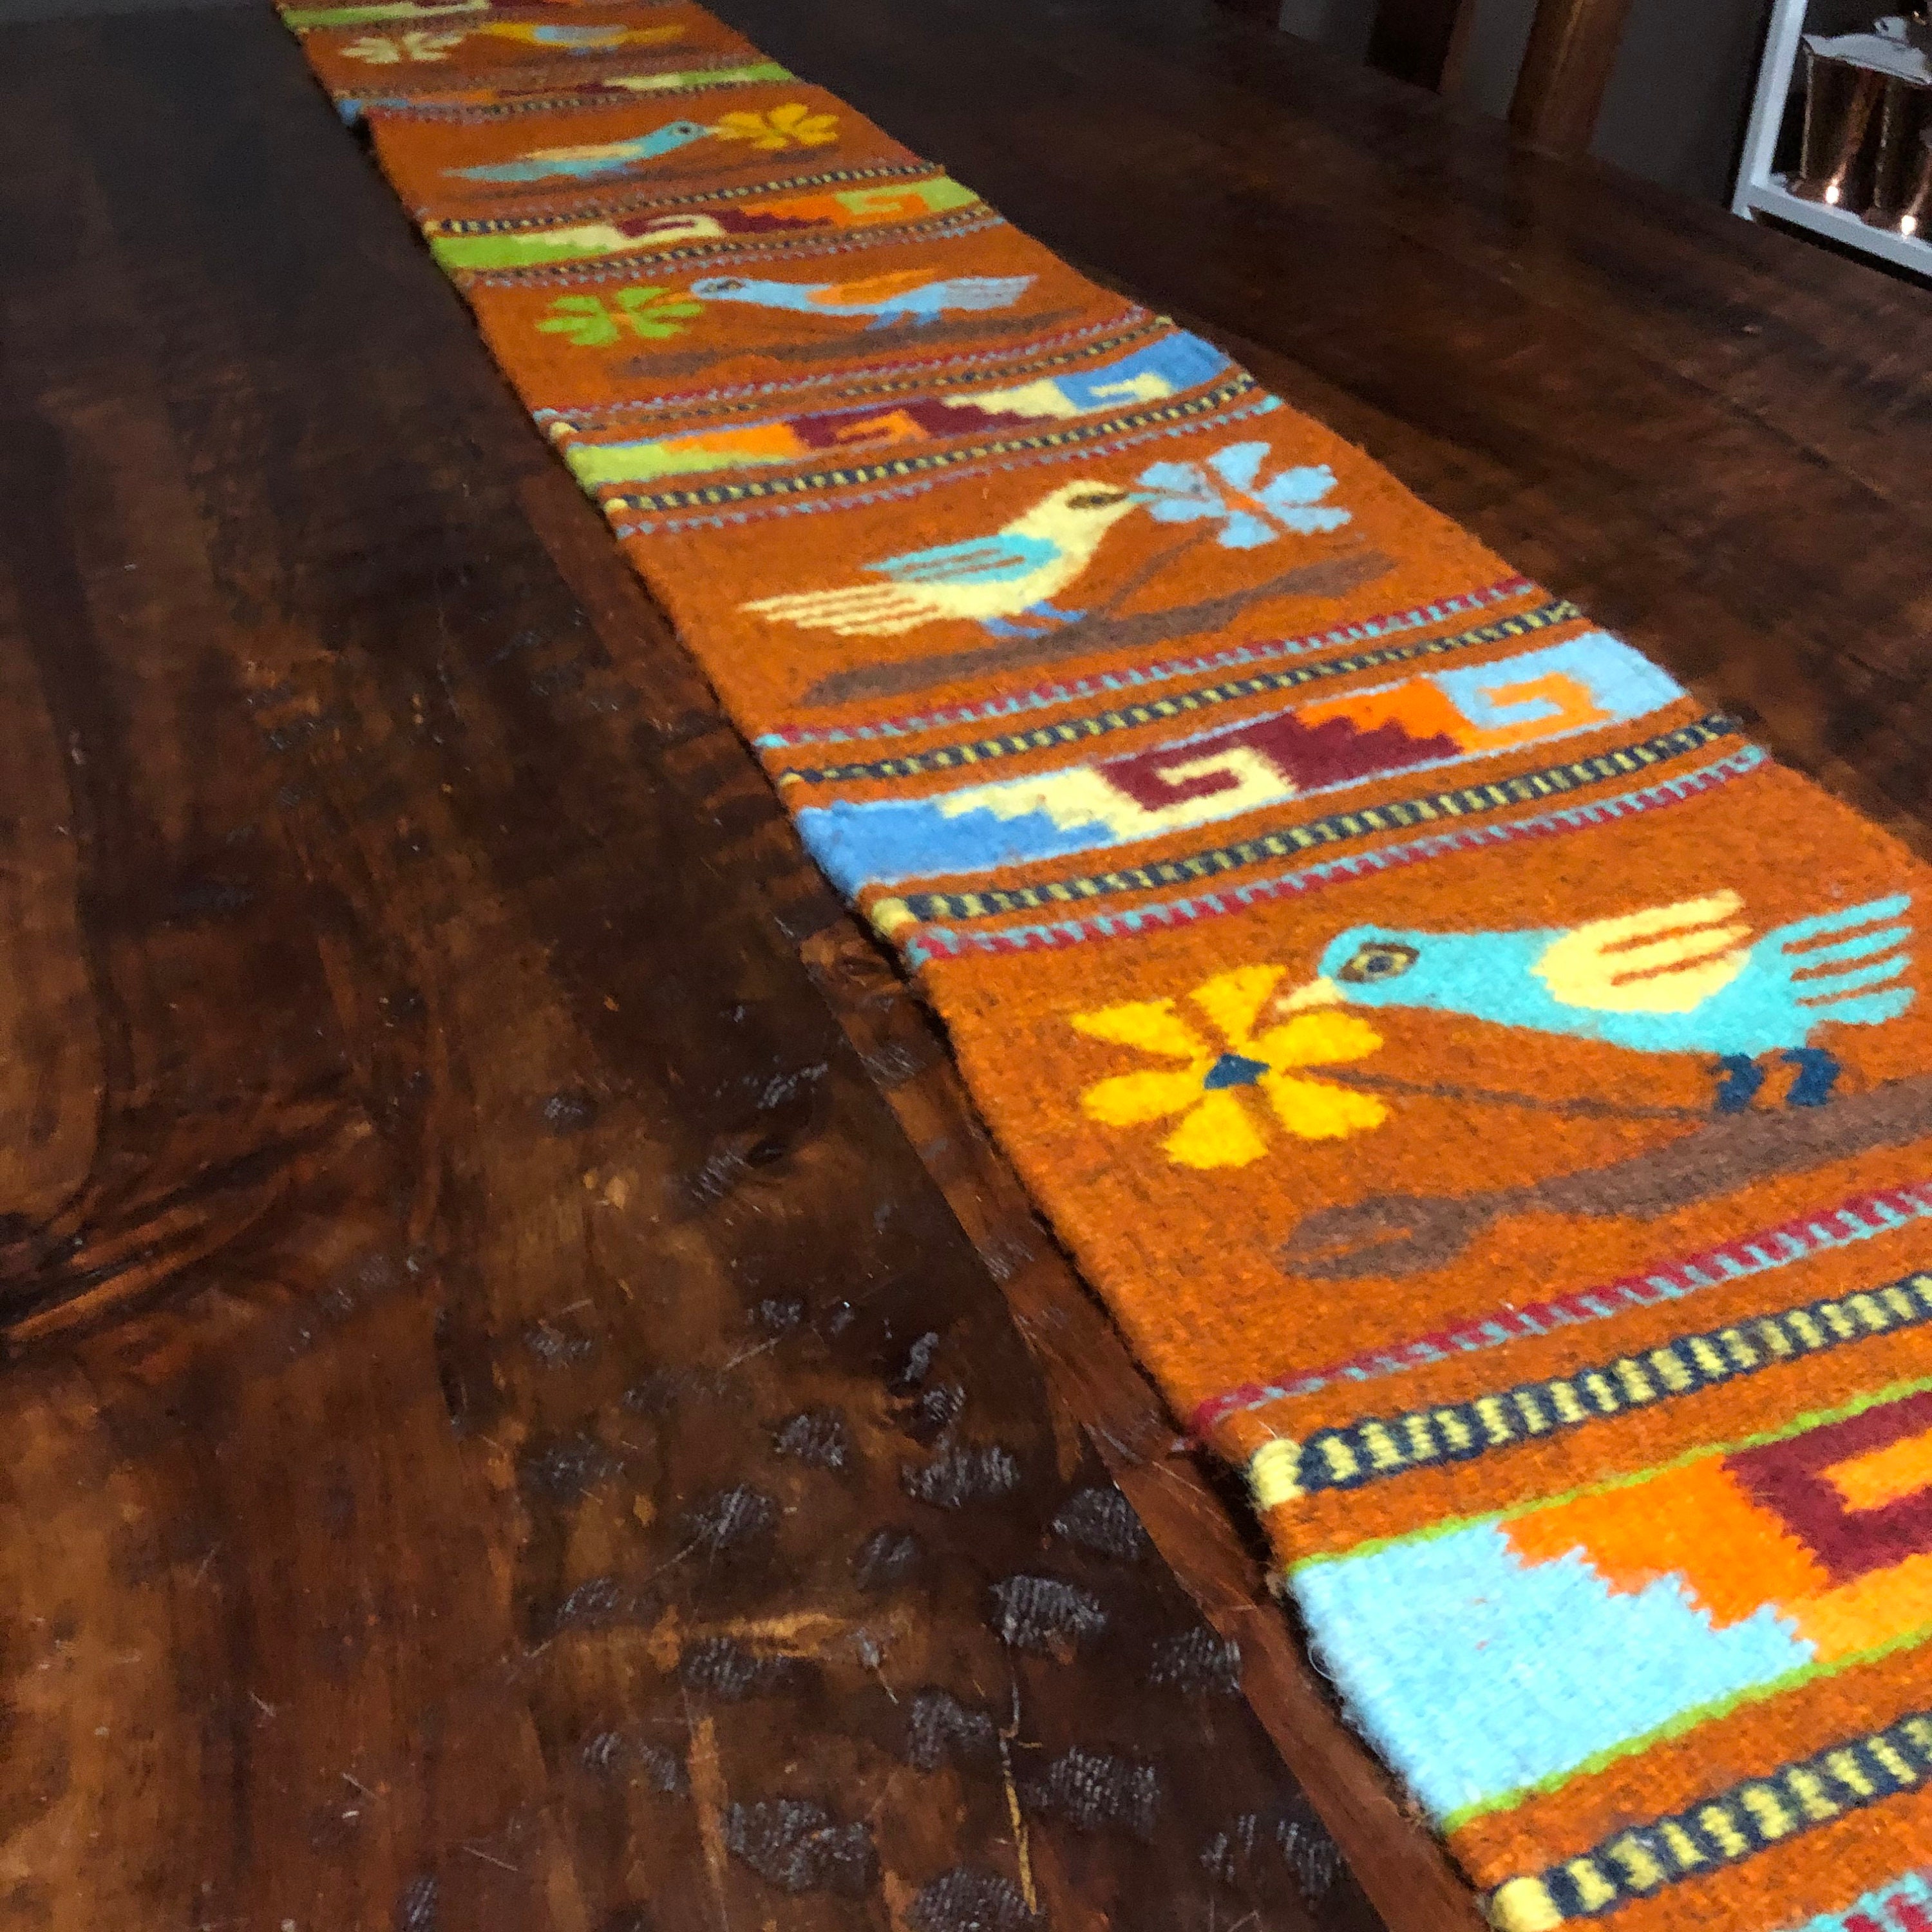 Zapotec hand woven merino wool table runner with birds and flowers 78” x 10